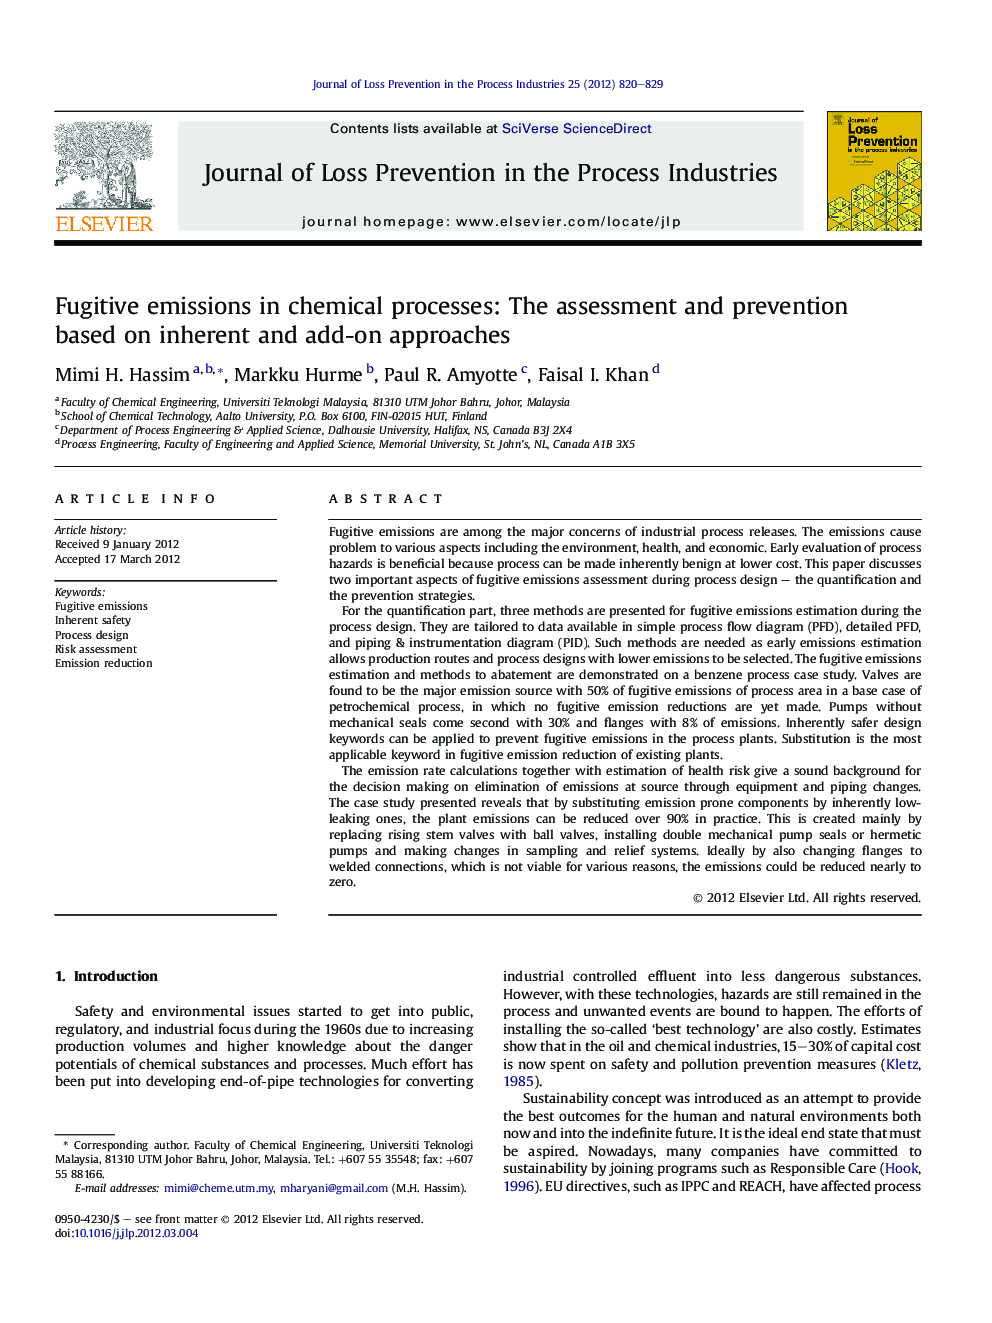 Fugitive emissions in chemical processes: The assessment and prevention based on inherent and add-on approaches